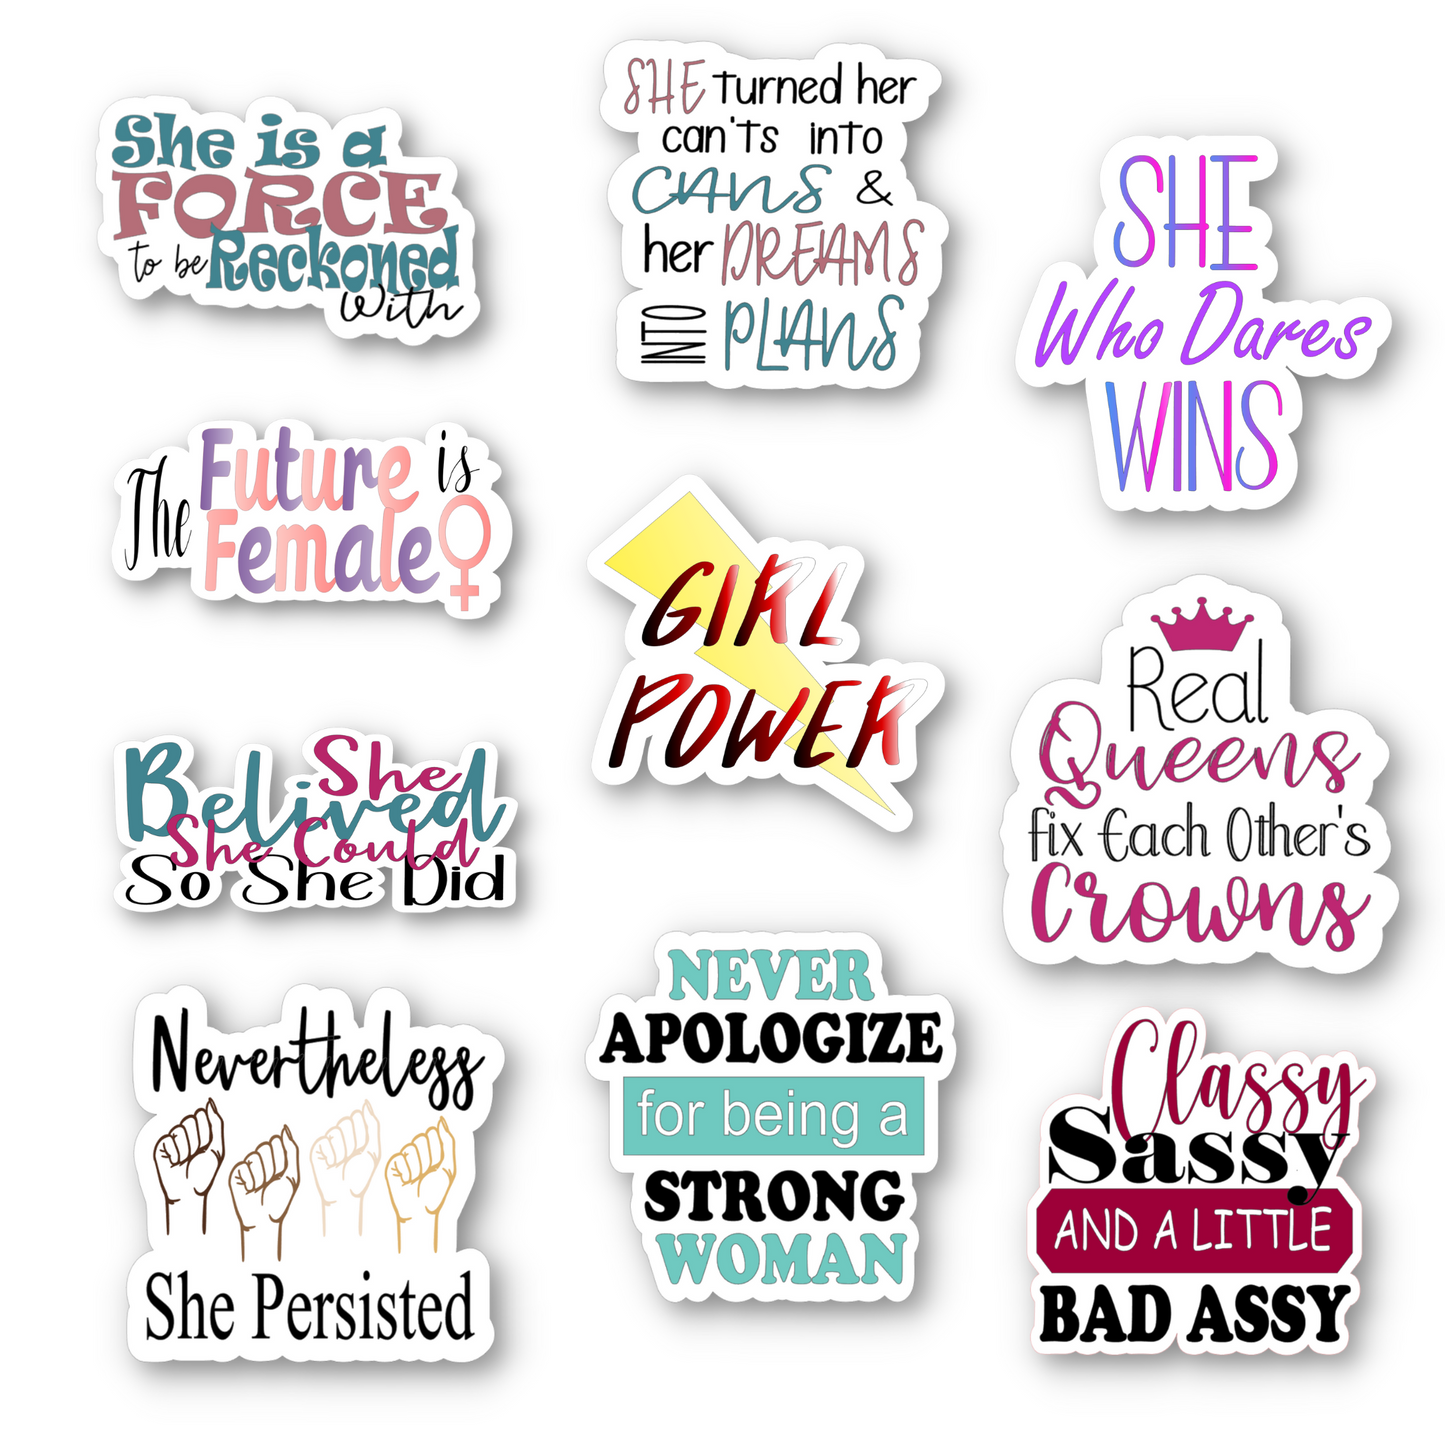 Motivational quotes for women. Includes the following 10 stickers: 💠She Believed She Could So She Did 💠Girl Power 💠The Future is Female 💠Classy Sassy and a Little Bad Assy 💠She Who Dares Wins 💠She Turned Her Cant's Into Cans and Her Dreams Into Plans 💠Nevertheless She Persisted 💠Never Apologize for Being a Strong Woman 💠She is a Force to Be Reckoned With 💠Real Queens Fix Each Other's Crowns